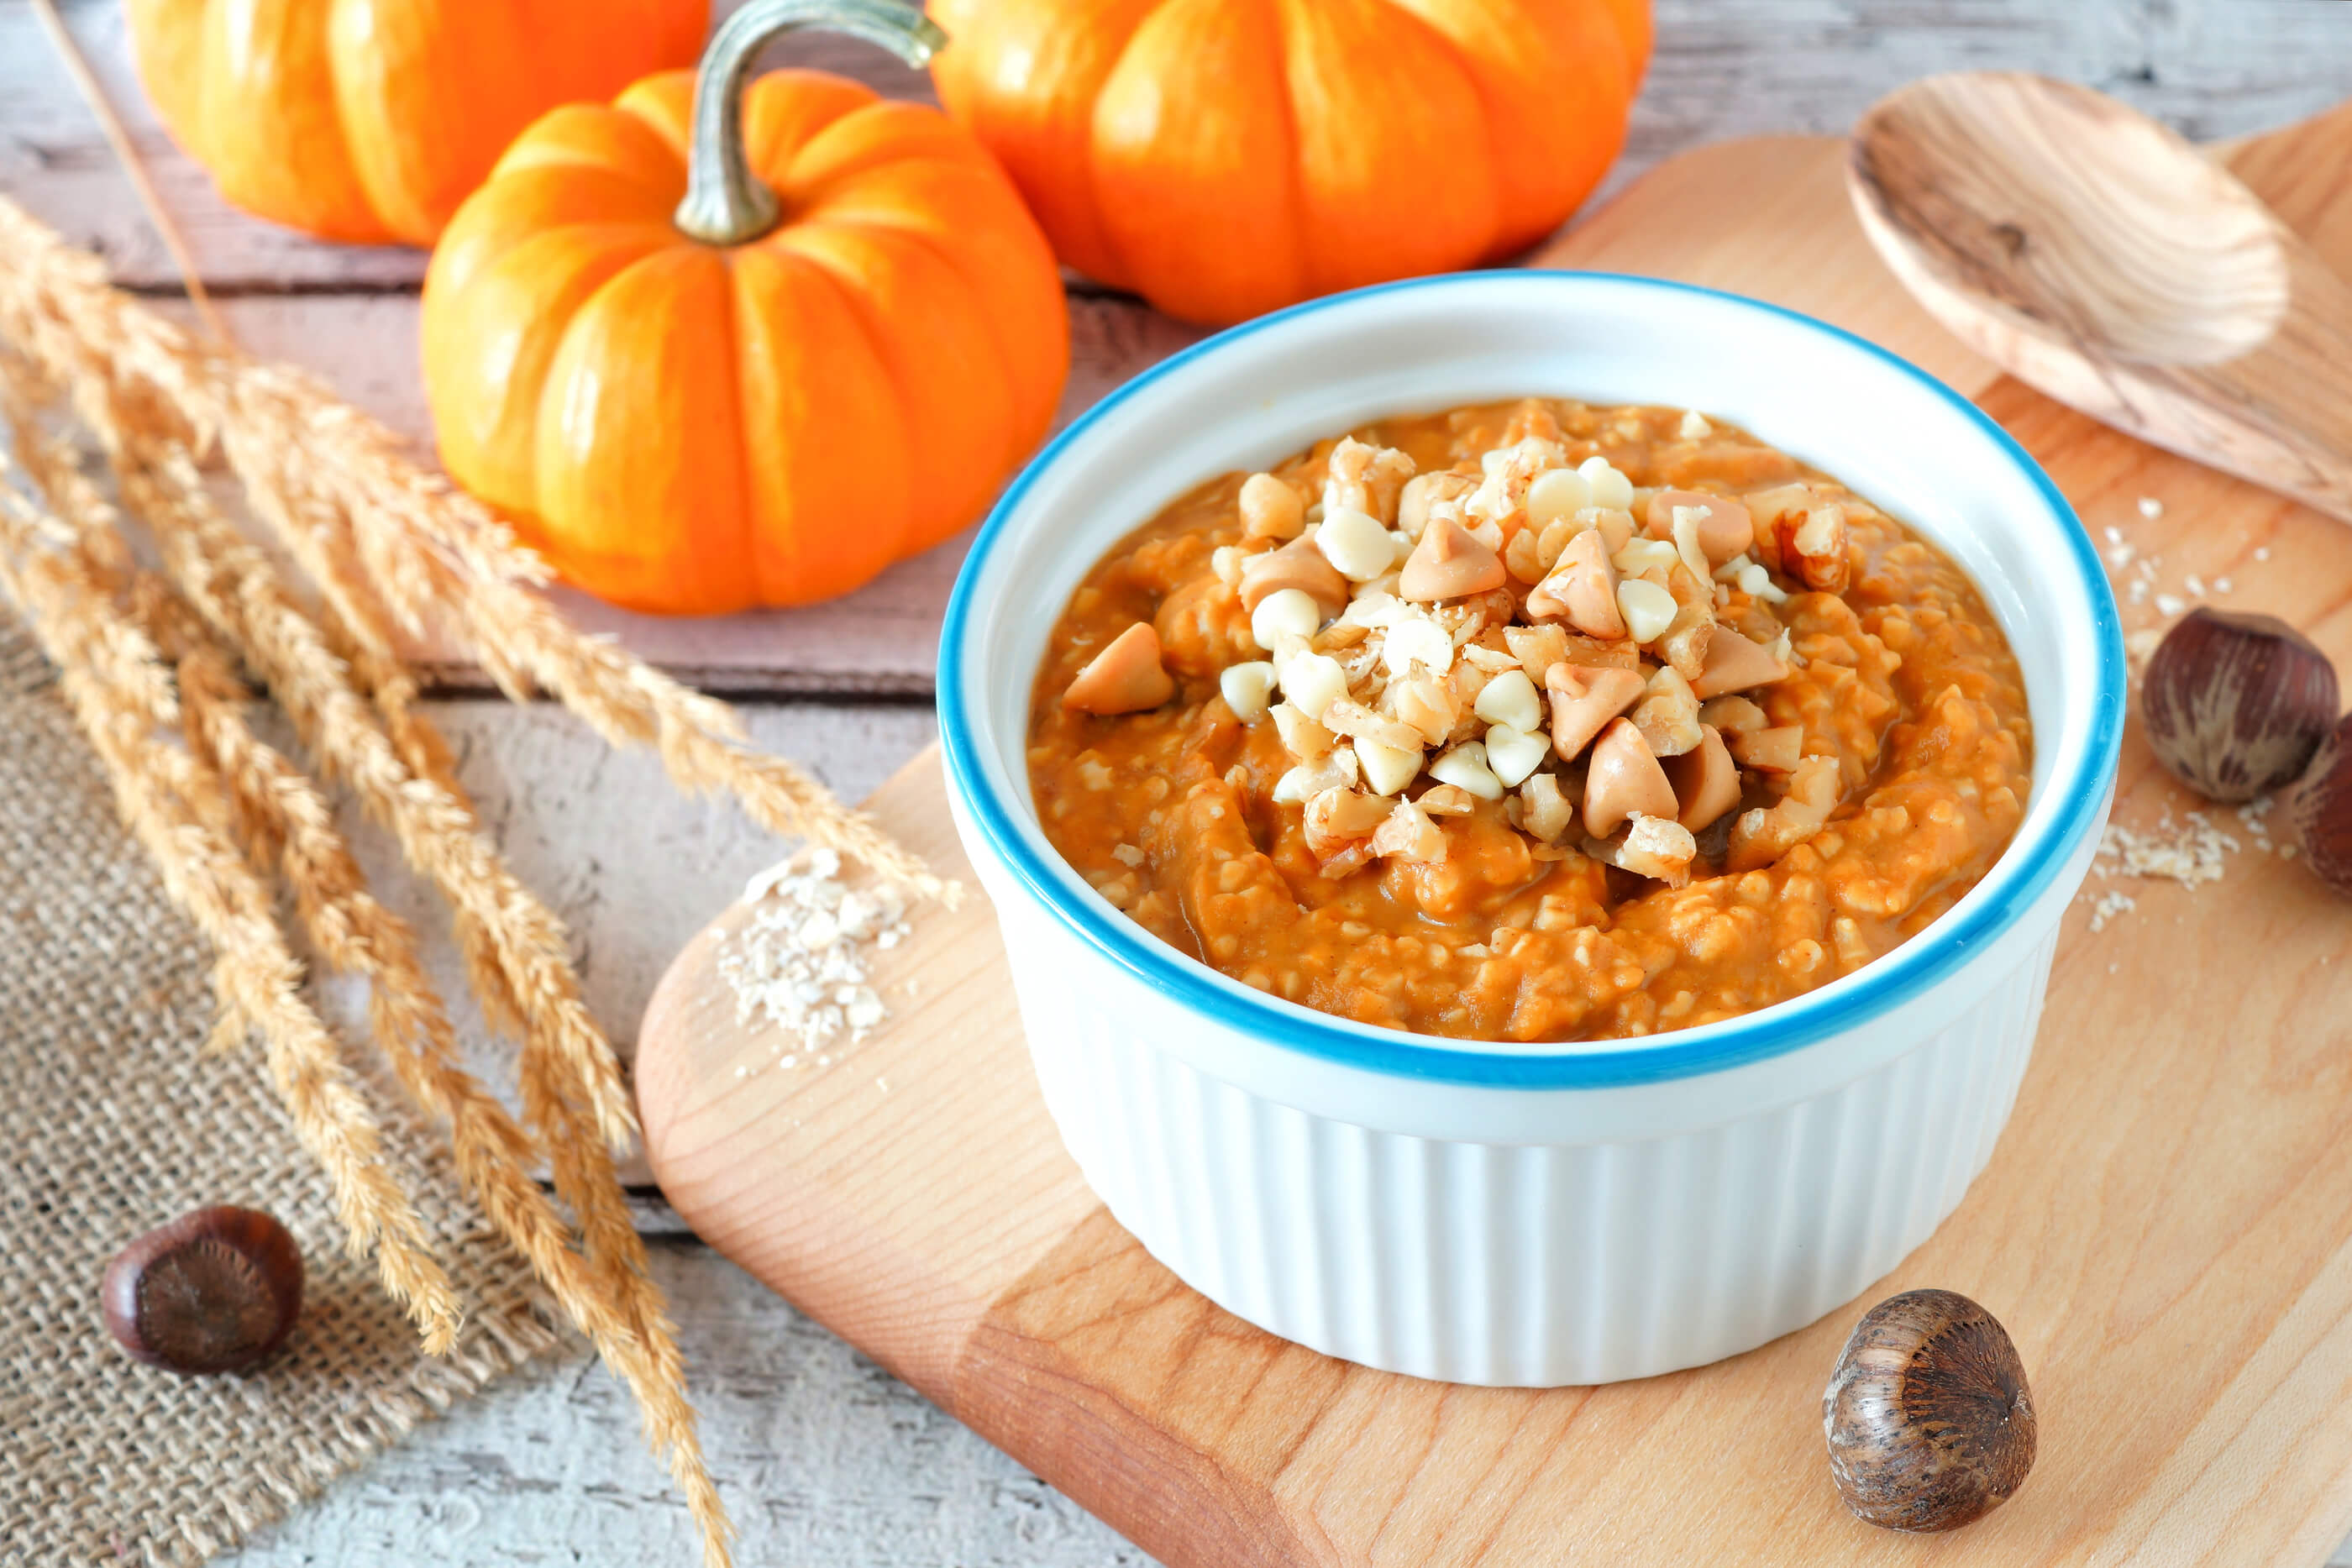 Pumpkin spice season is upon us! Are you running to or from this trend? Check out this Trim Health Mama Pumpkin Spice roundup for awesome on-plan recipes!